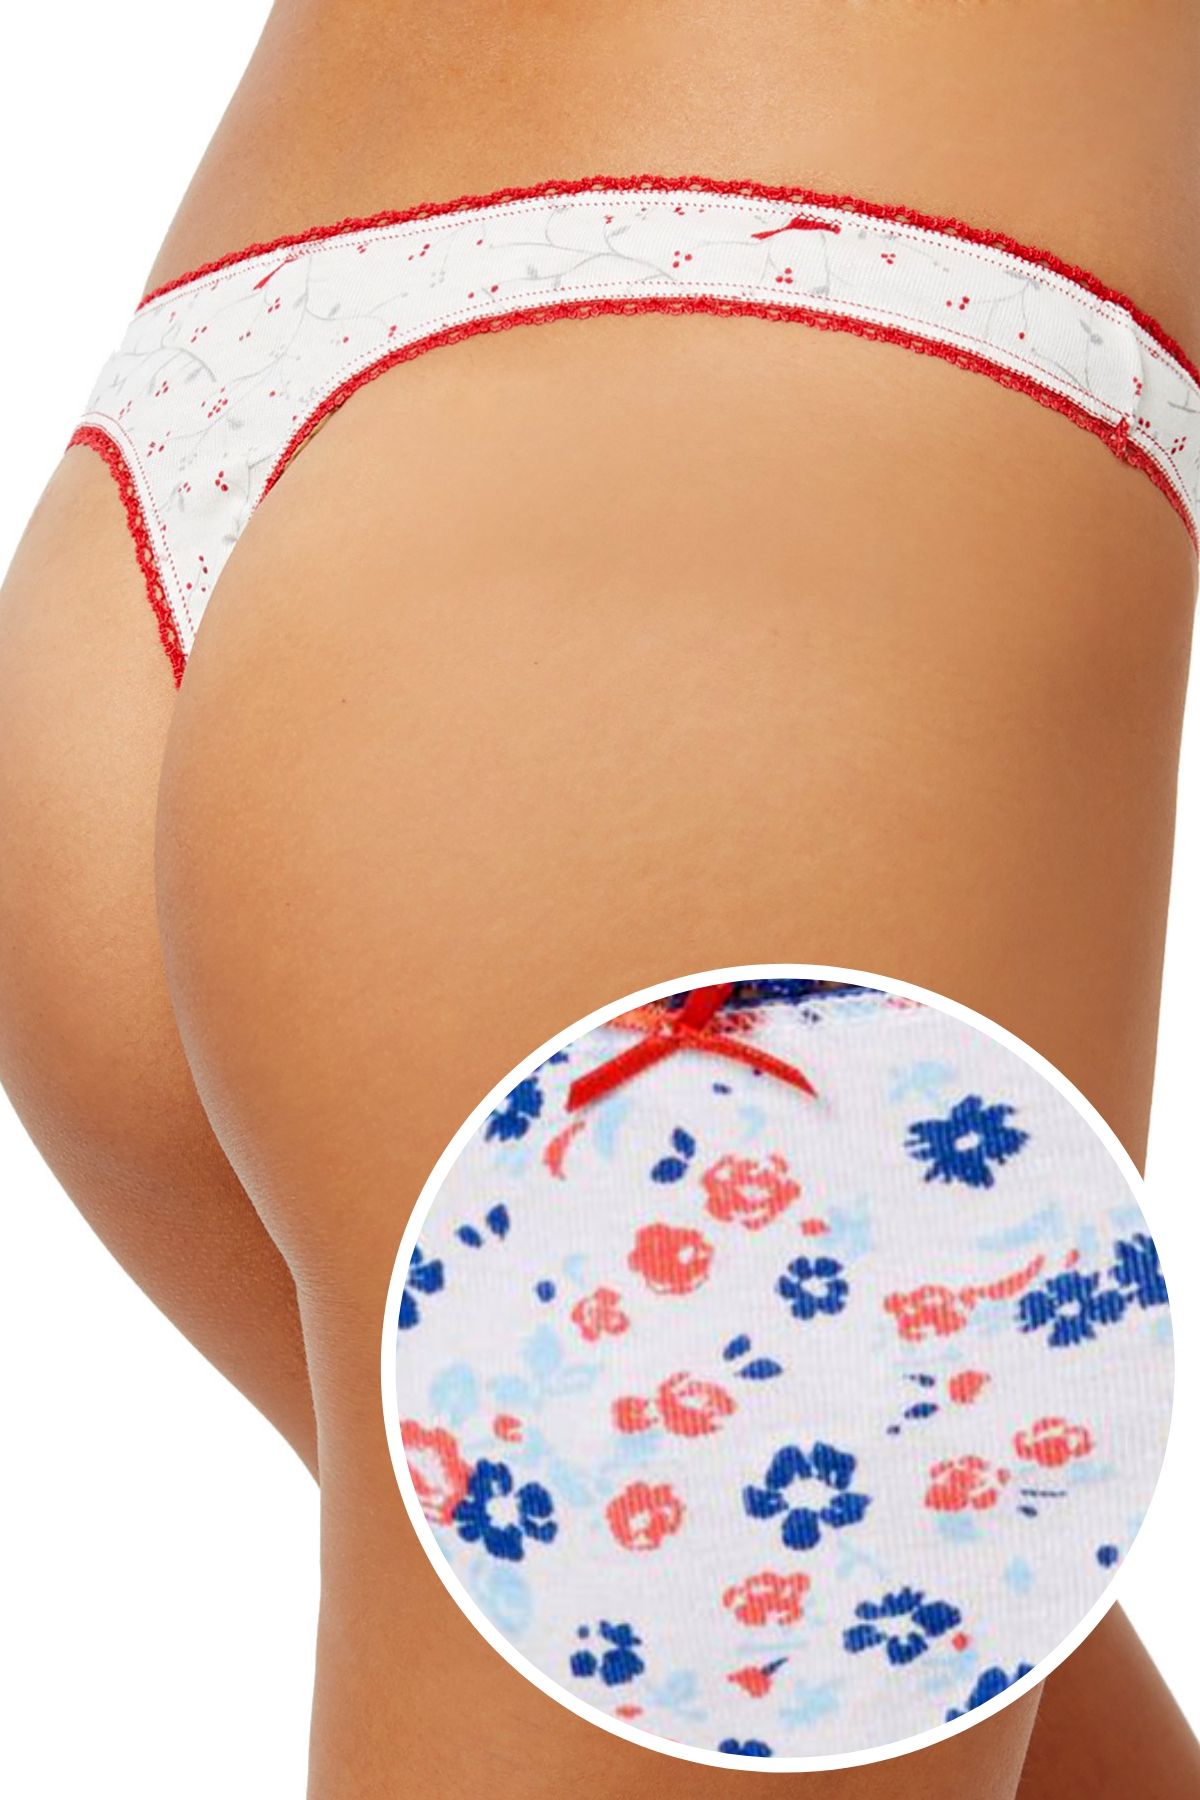 Charter Club Intimates Blooming Floral Pretty Cotton Thong